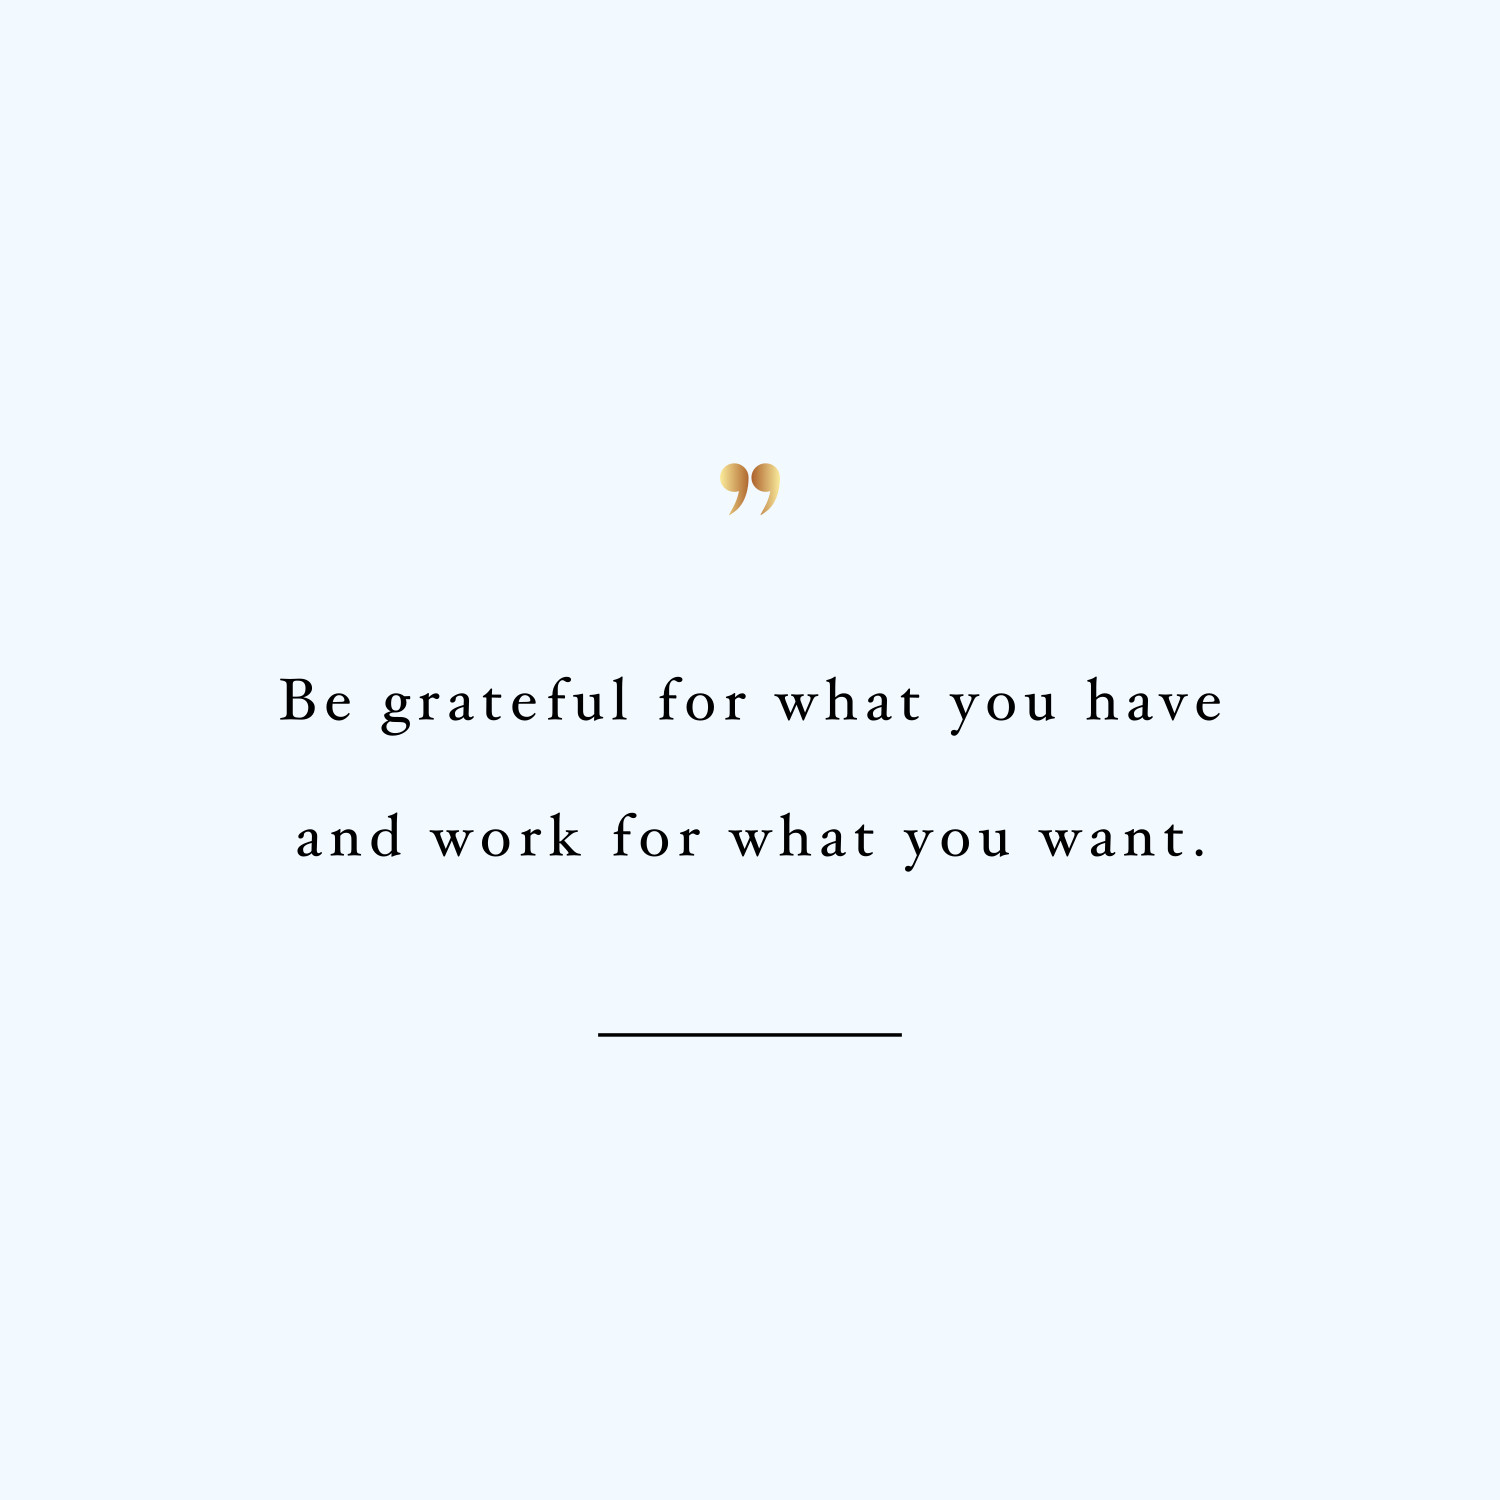 Be grateful! Browse our collection of inspirational exercise quotes and get instant health and fitness motivation. Transform positive thoughts into positive actions and get fit, healthy and happy! https://www.spotebi.com/workout-motivation/be-grateful-health-and-fitness-motivation/